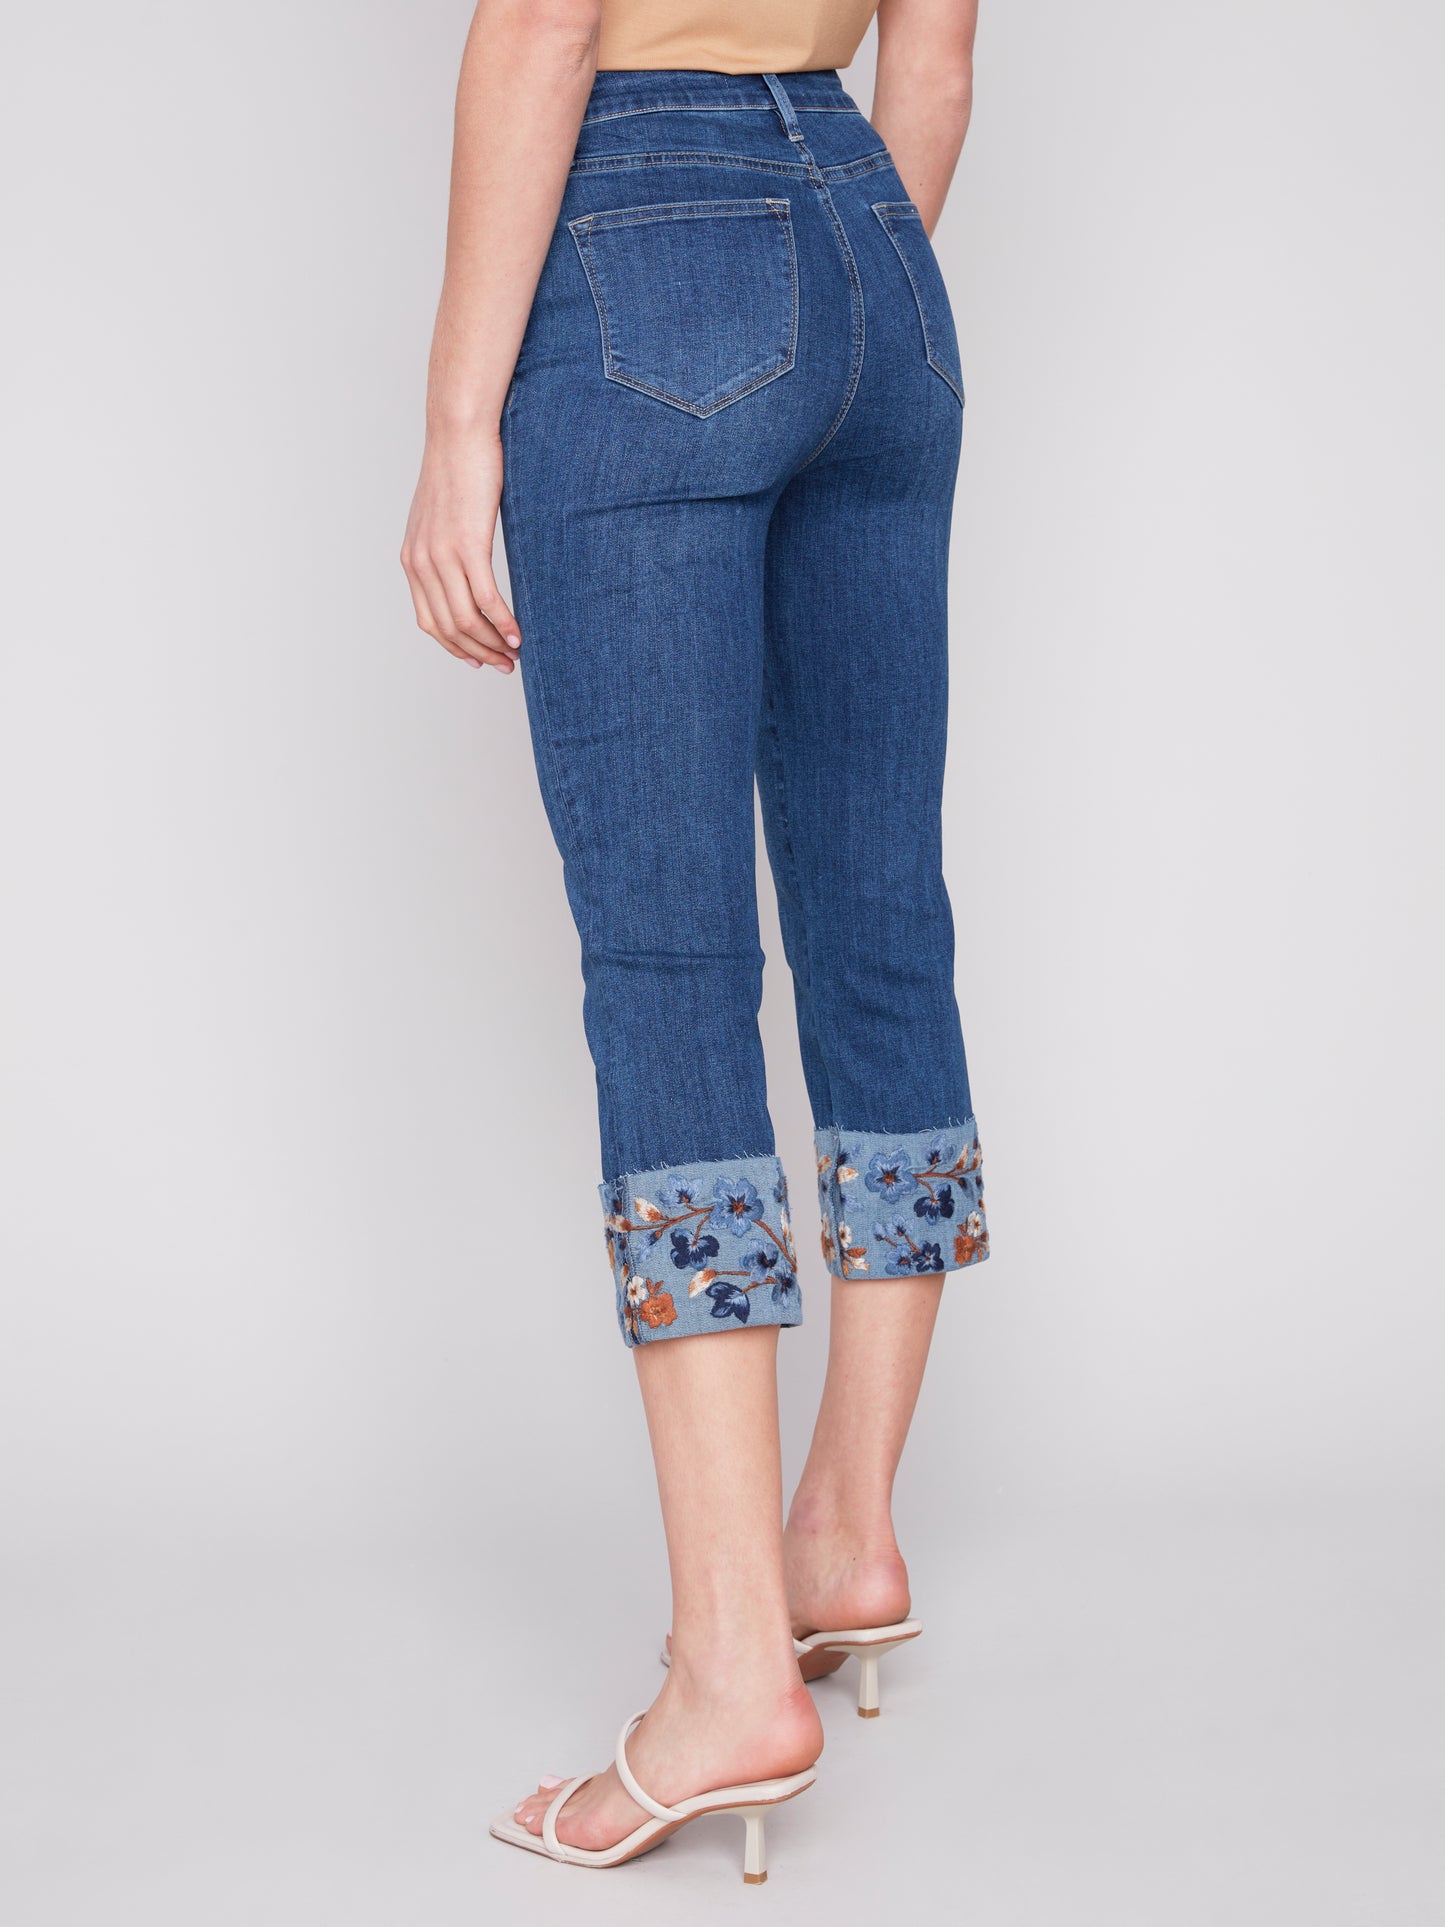 A woman wearing a pair of Charlie B stylish and versatile jeans with Embroidered Cuffed Ankle Pants.